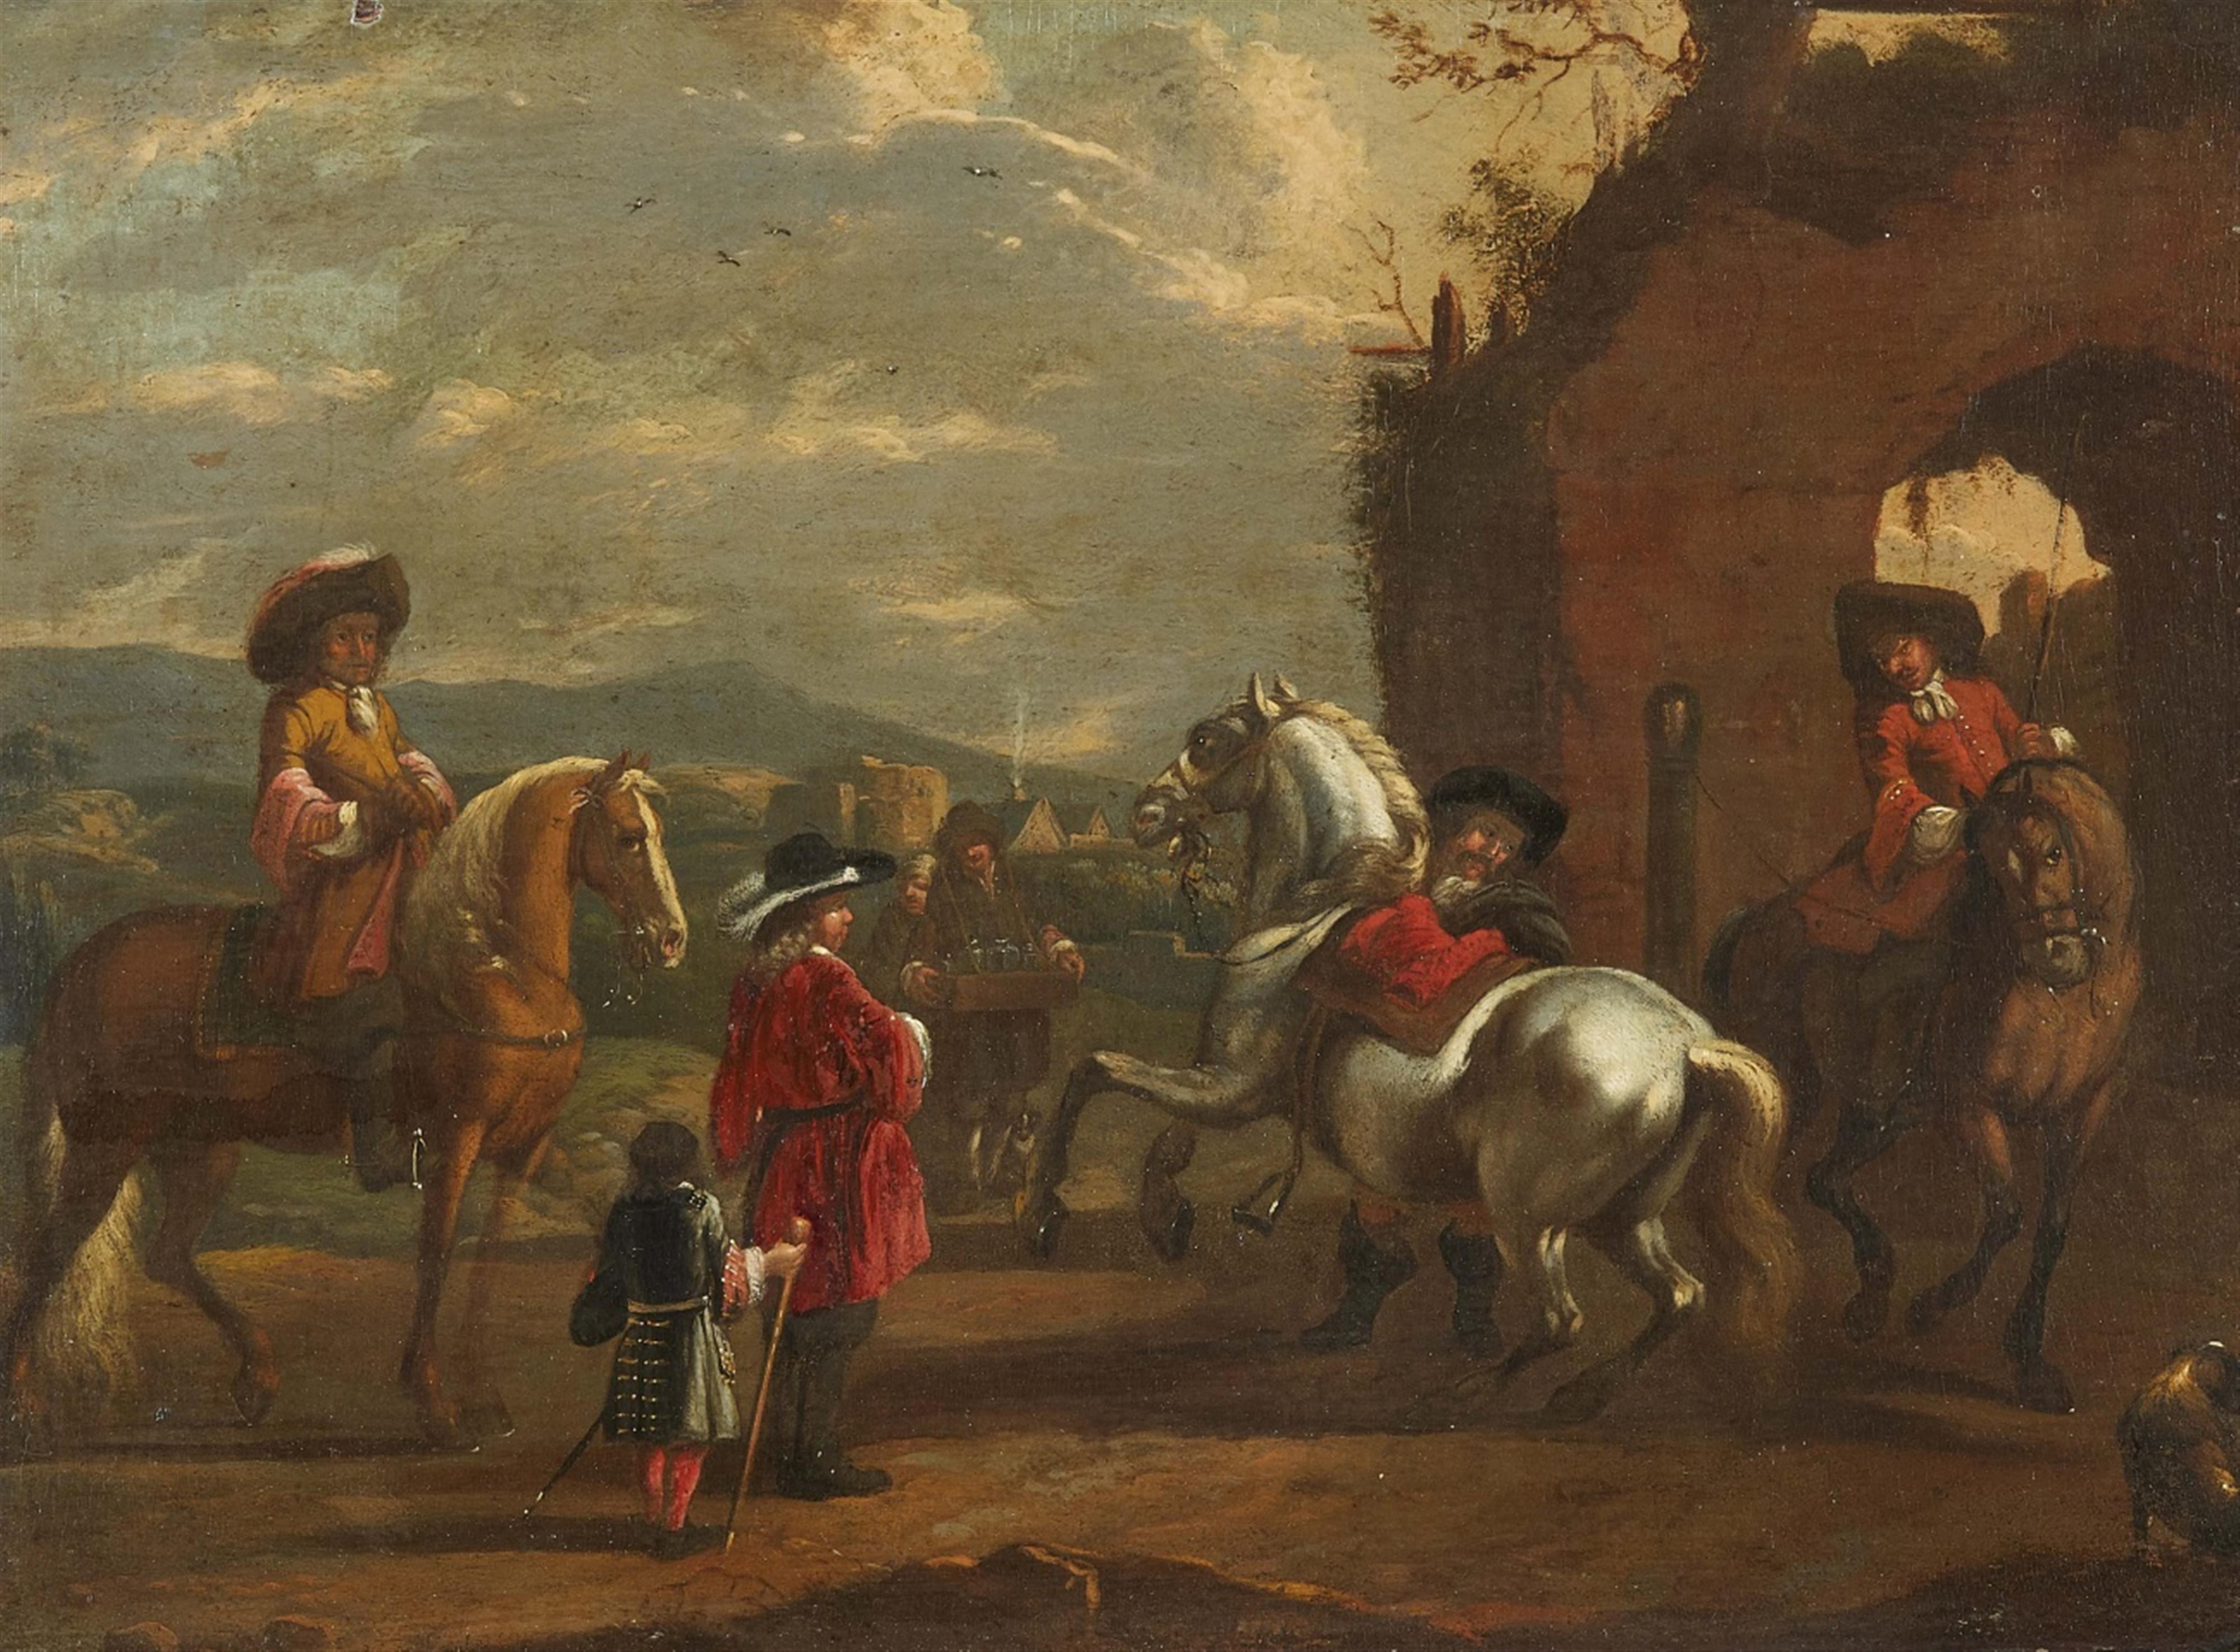 Carel van Falens, attributed to - Landscape with Riders and a Hawker - image-1